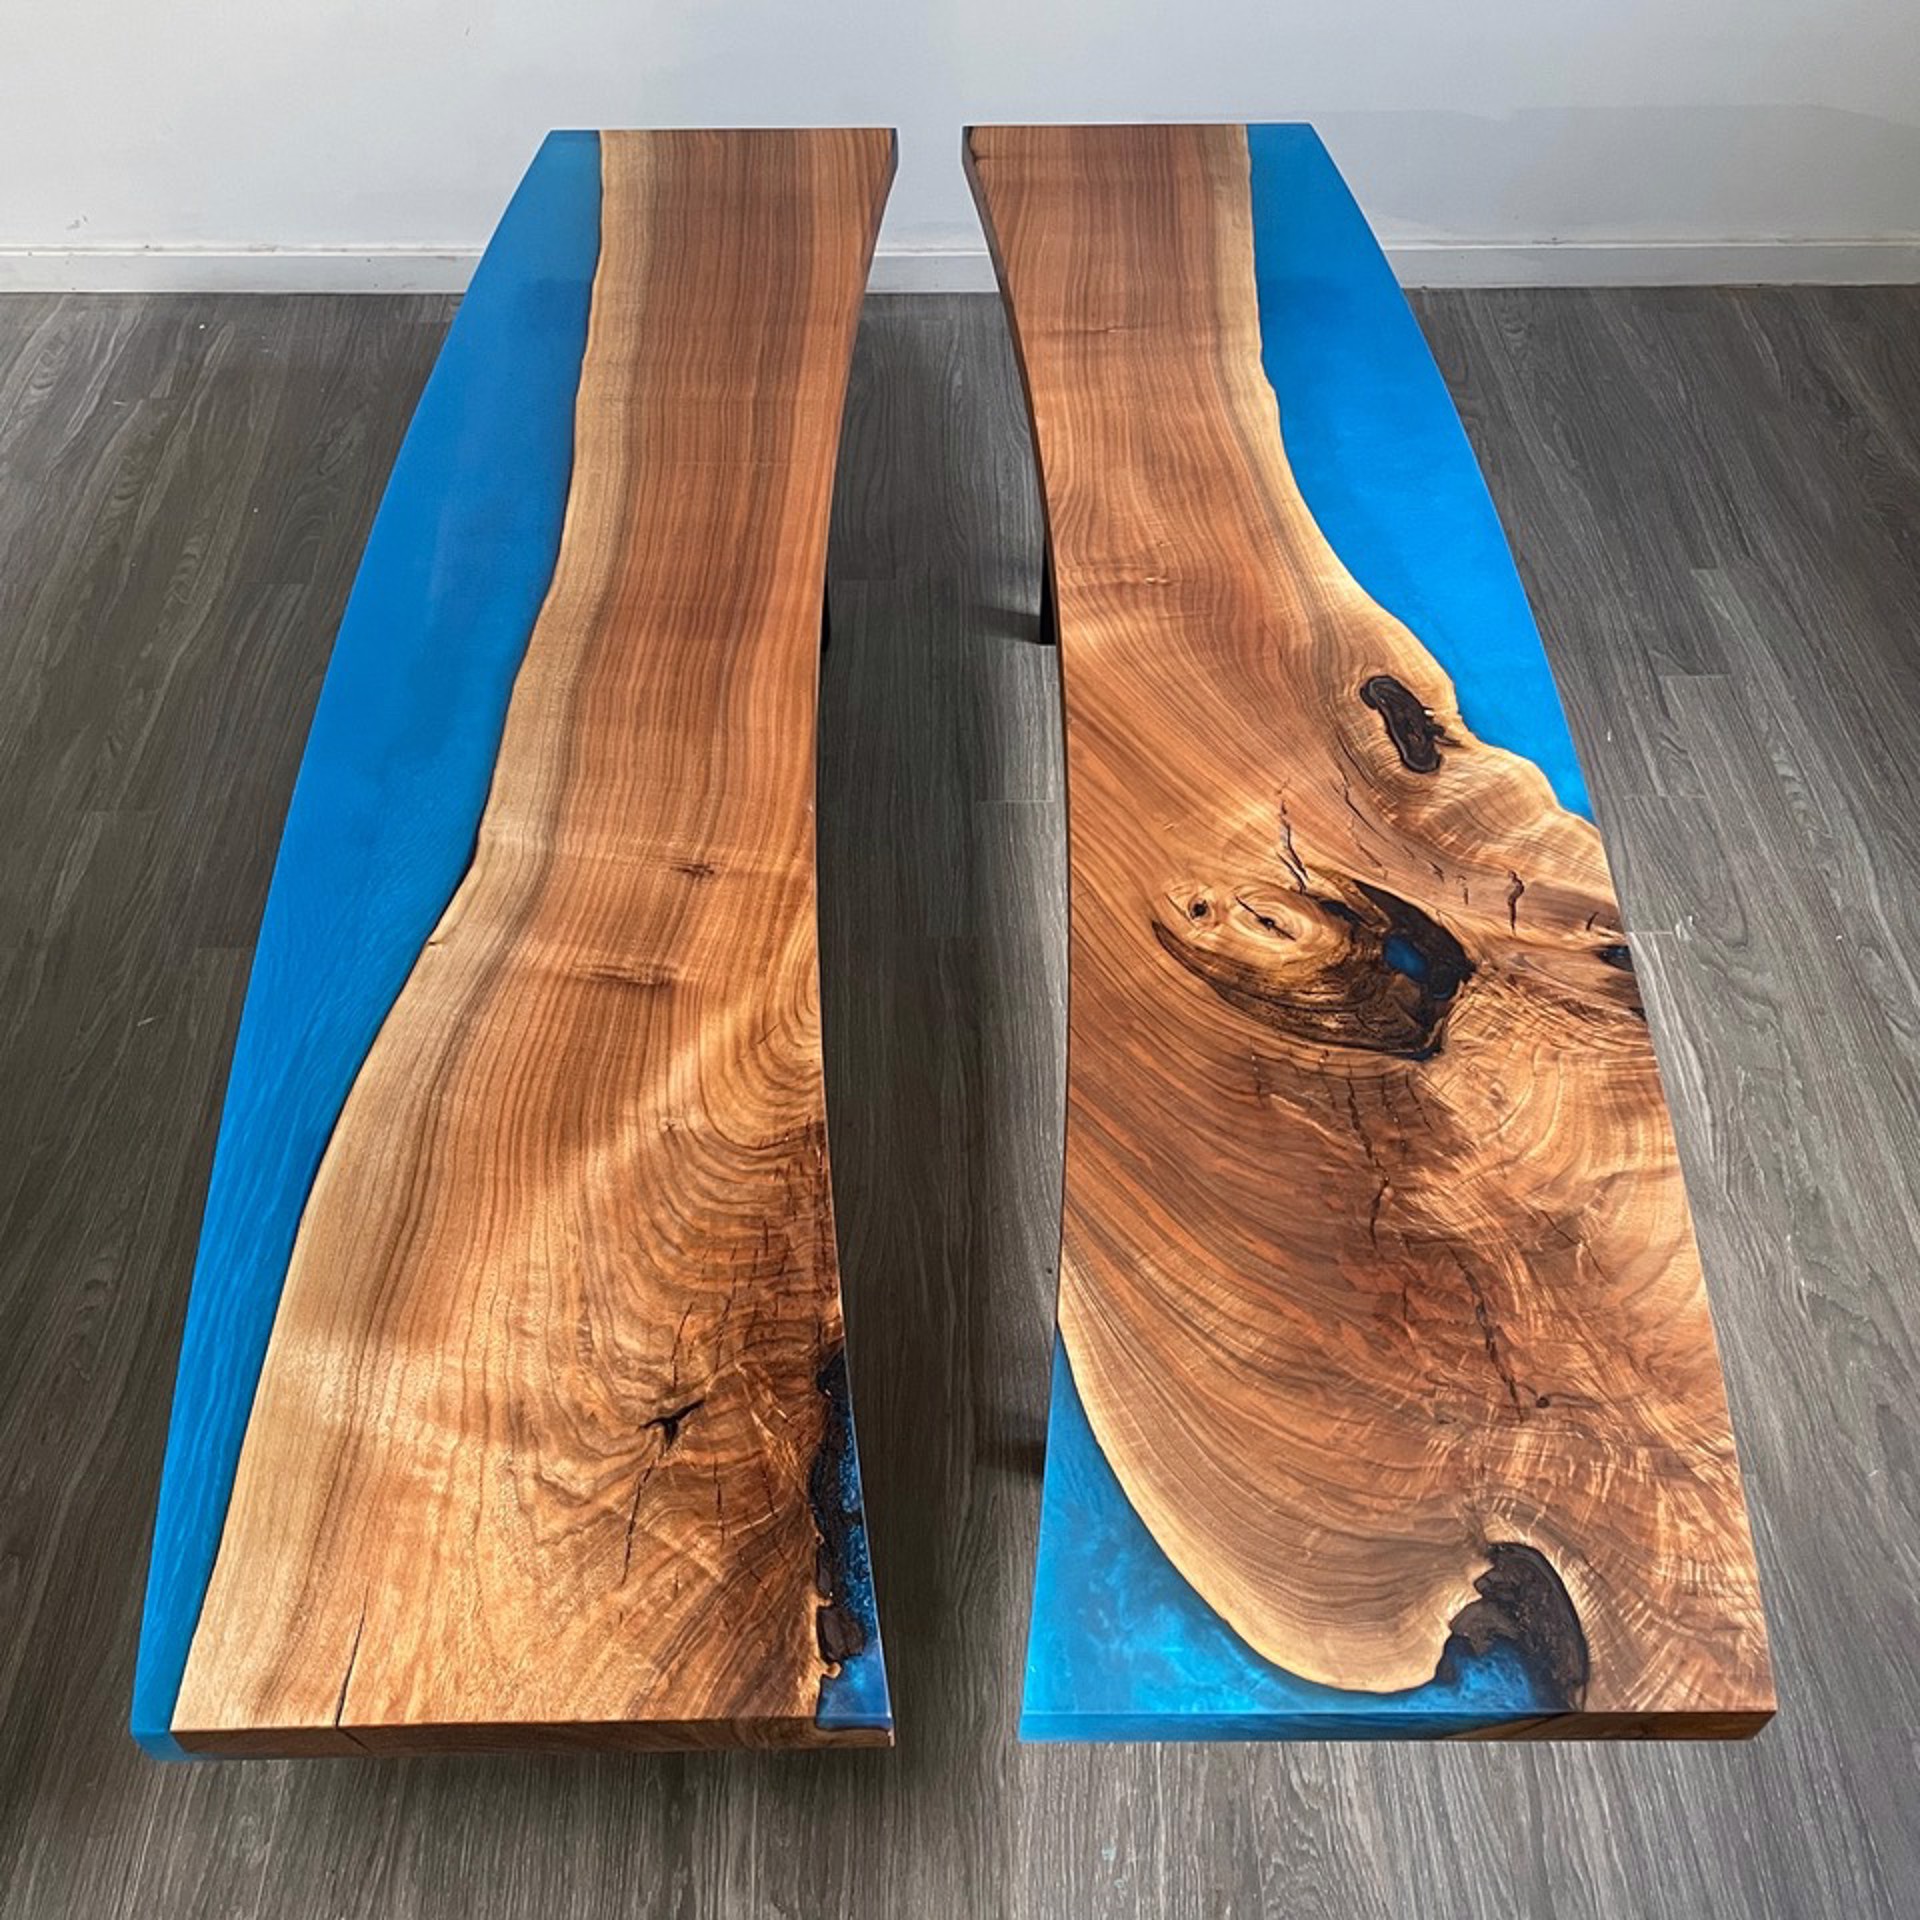 Iridescent blue and Butternut Benches by Benjamin McLaughlin